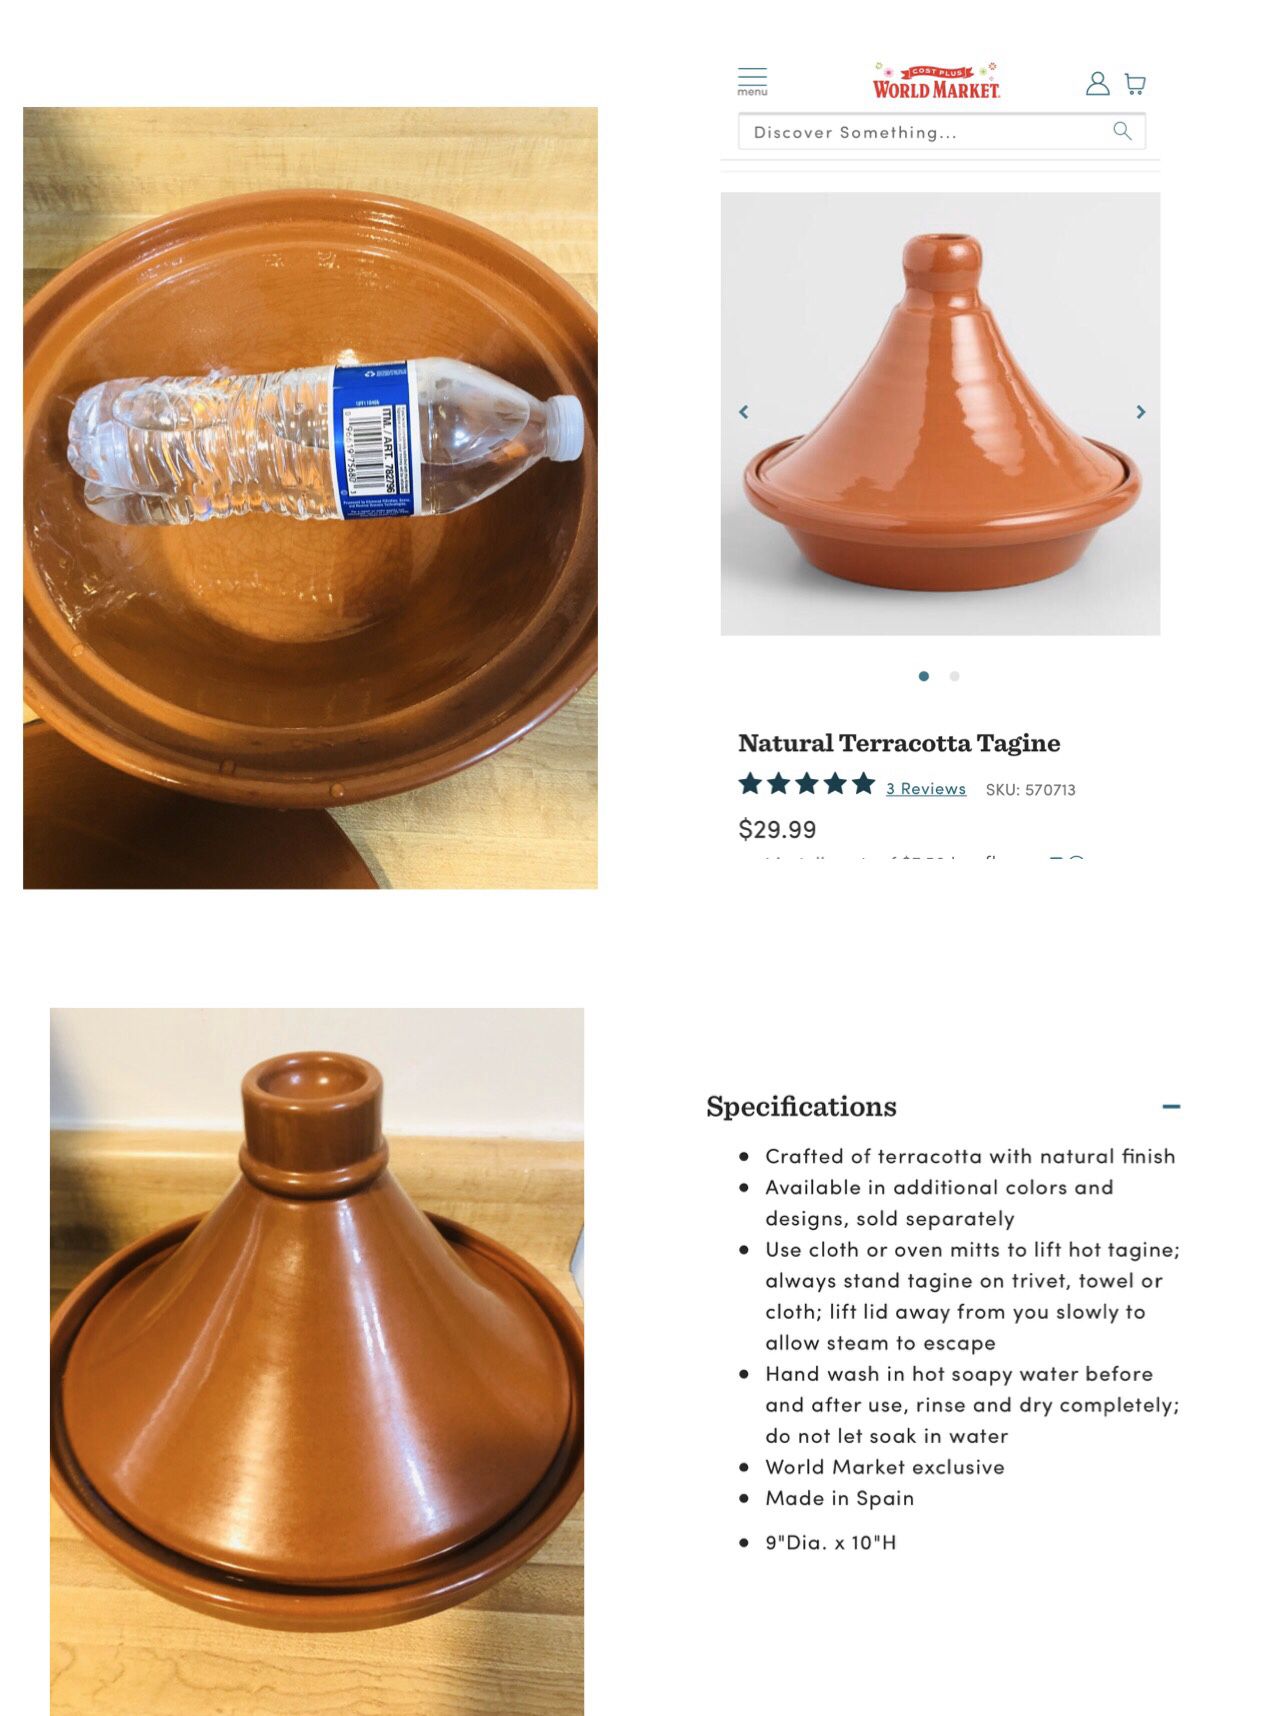 Natural Terracotta Tagine 9"Dia. x 10"H in excellent condition used one time (pick up only)